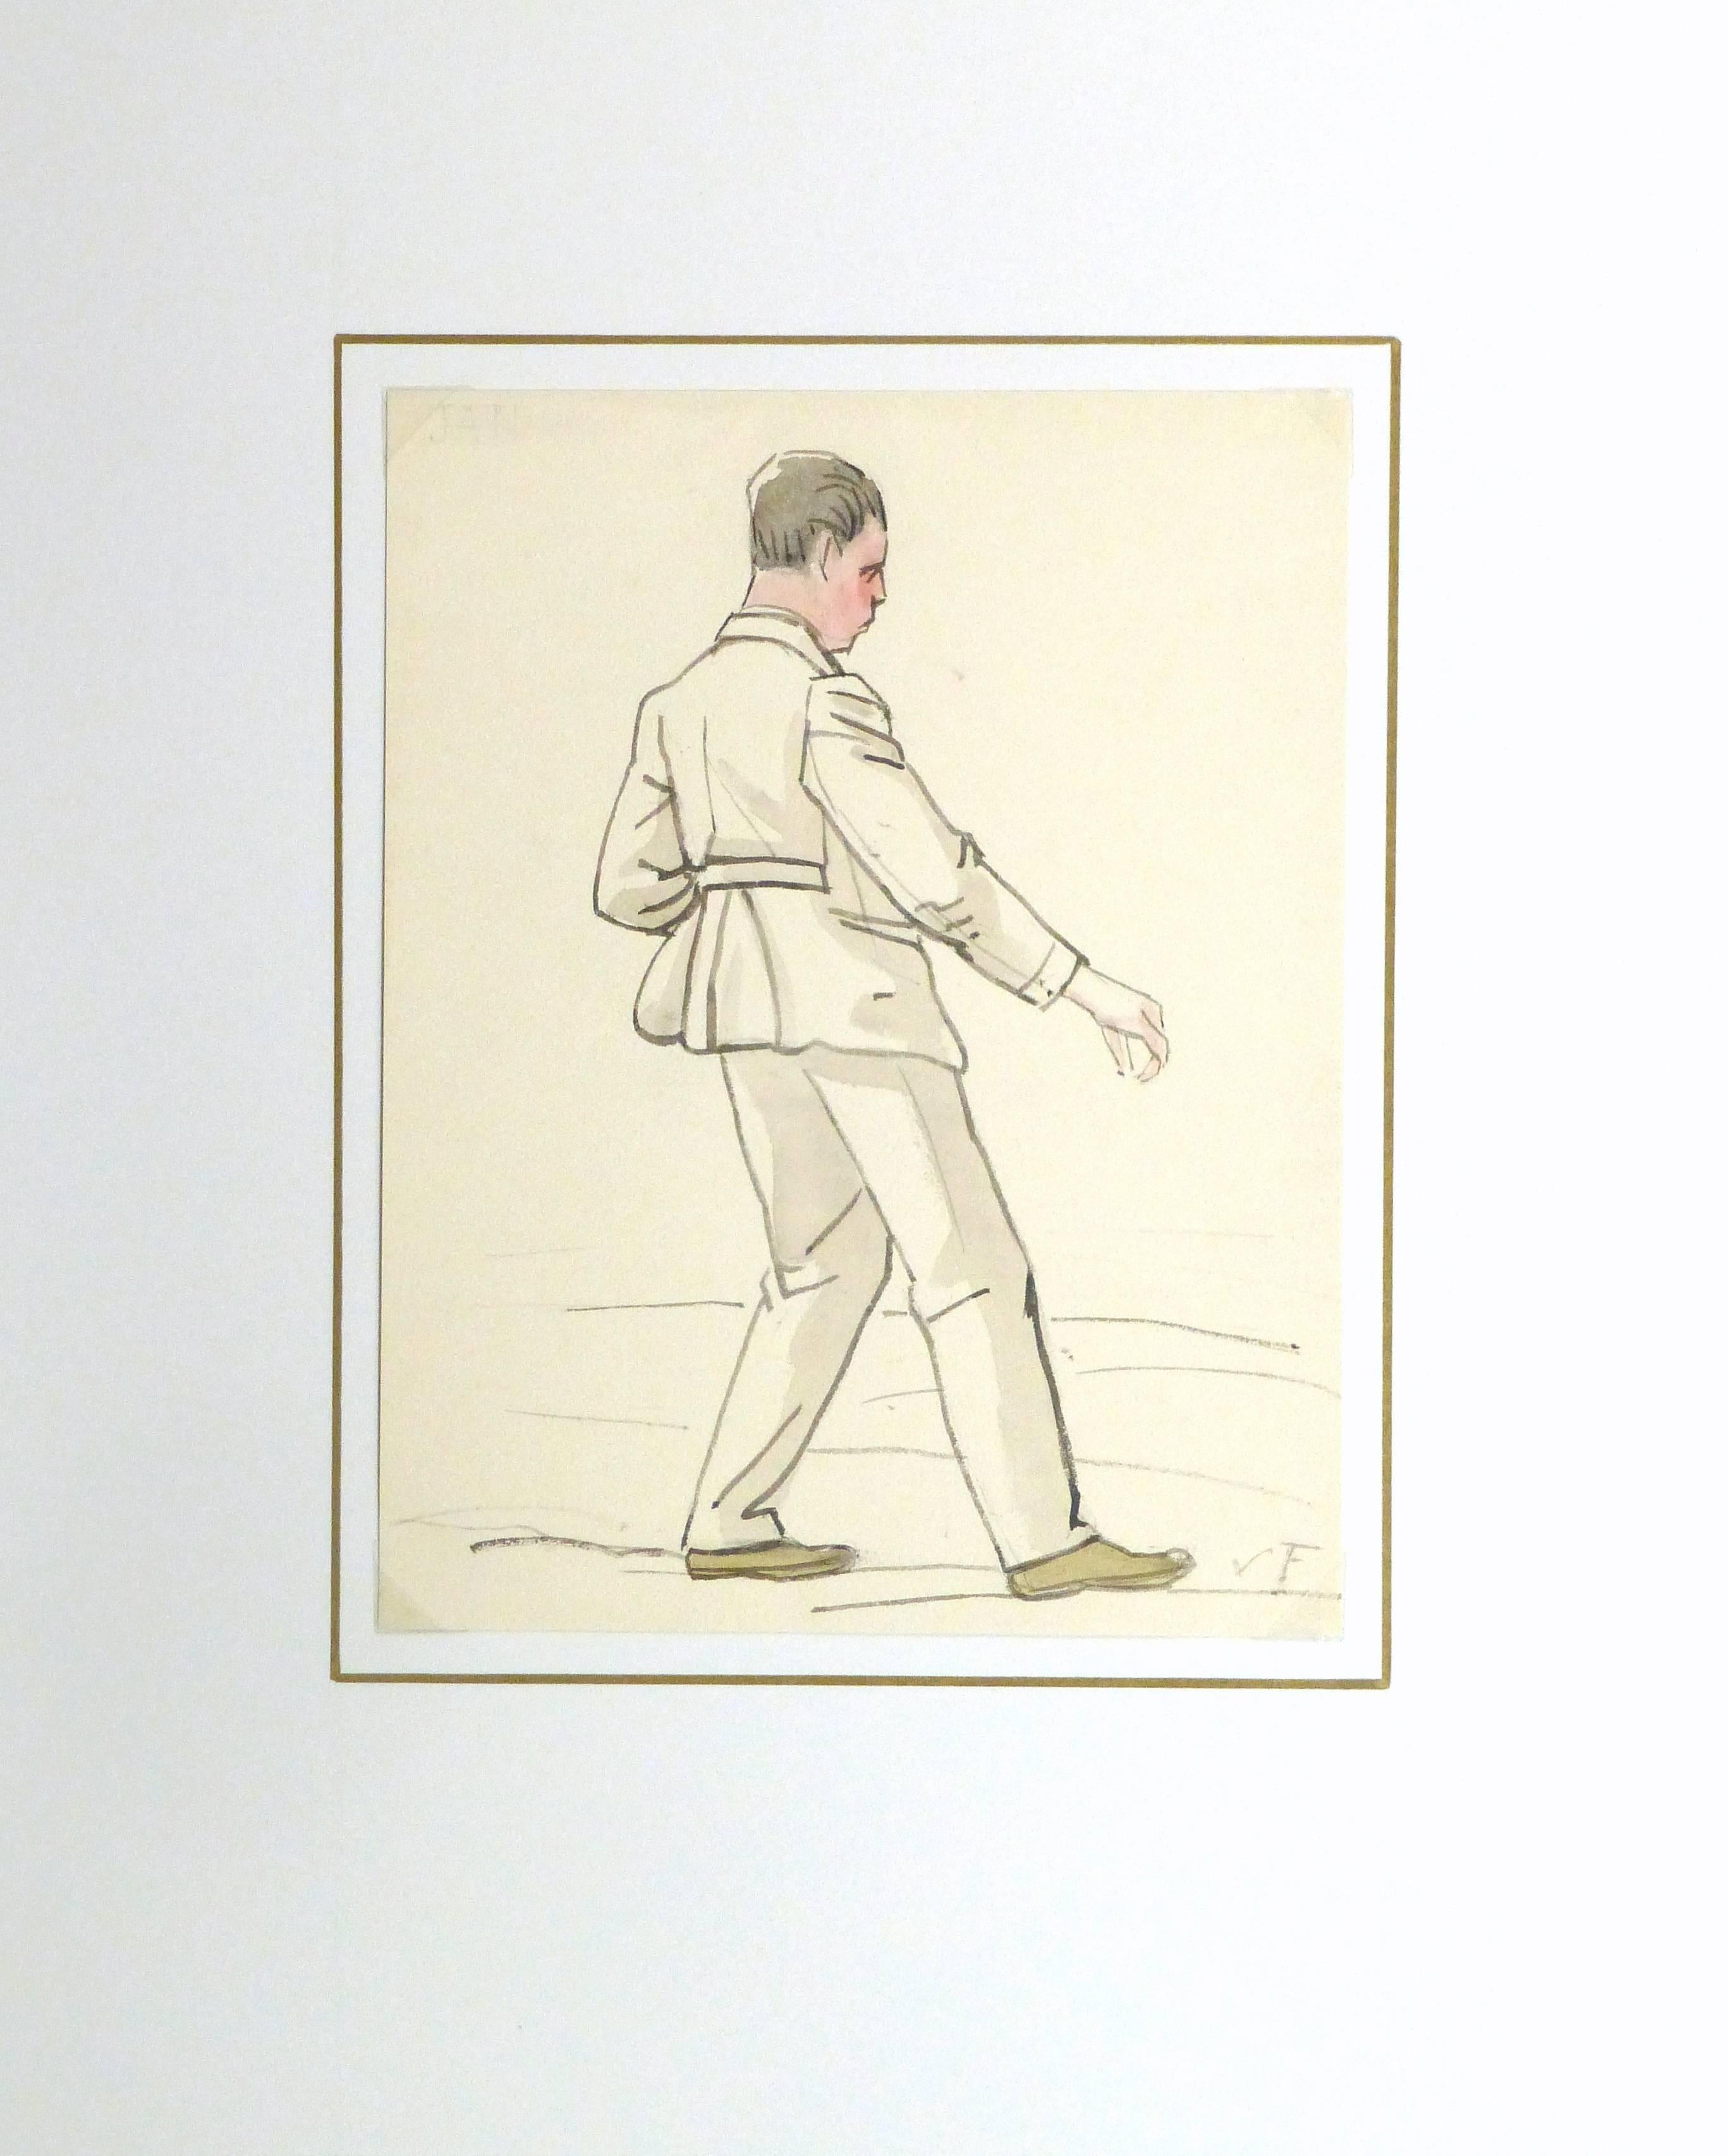 Light and bright watercolor and ink drawing of a man strolling the streets in a two piece suit, circa 1940. Initialed lower right.

Original artwork on paper displayed on a white mat with a gold border. Archival plastic sleeve and Certificate of